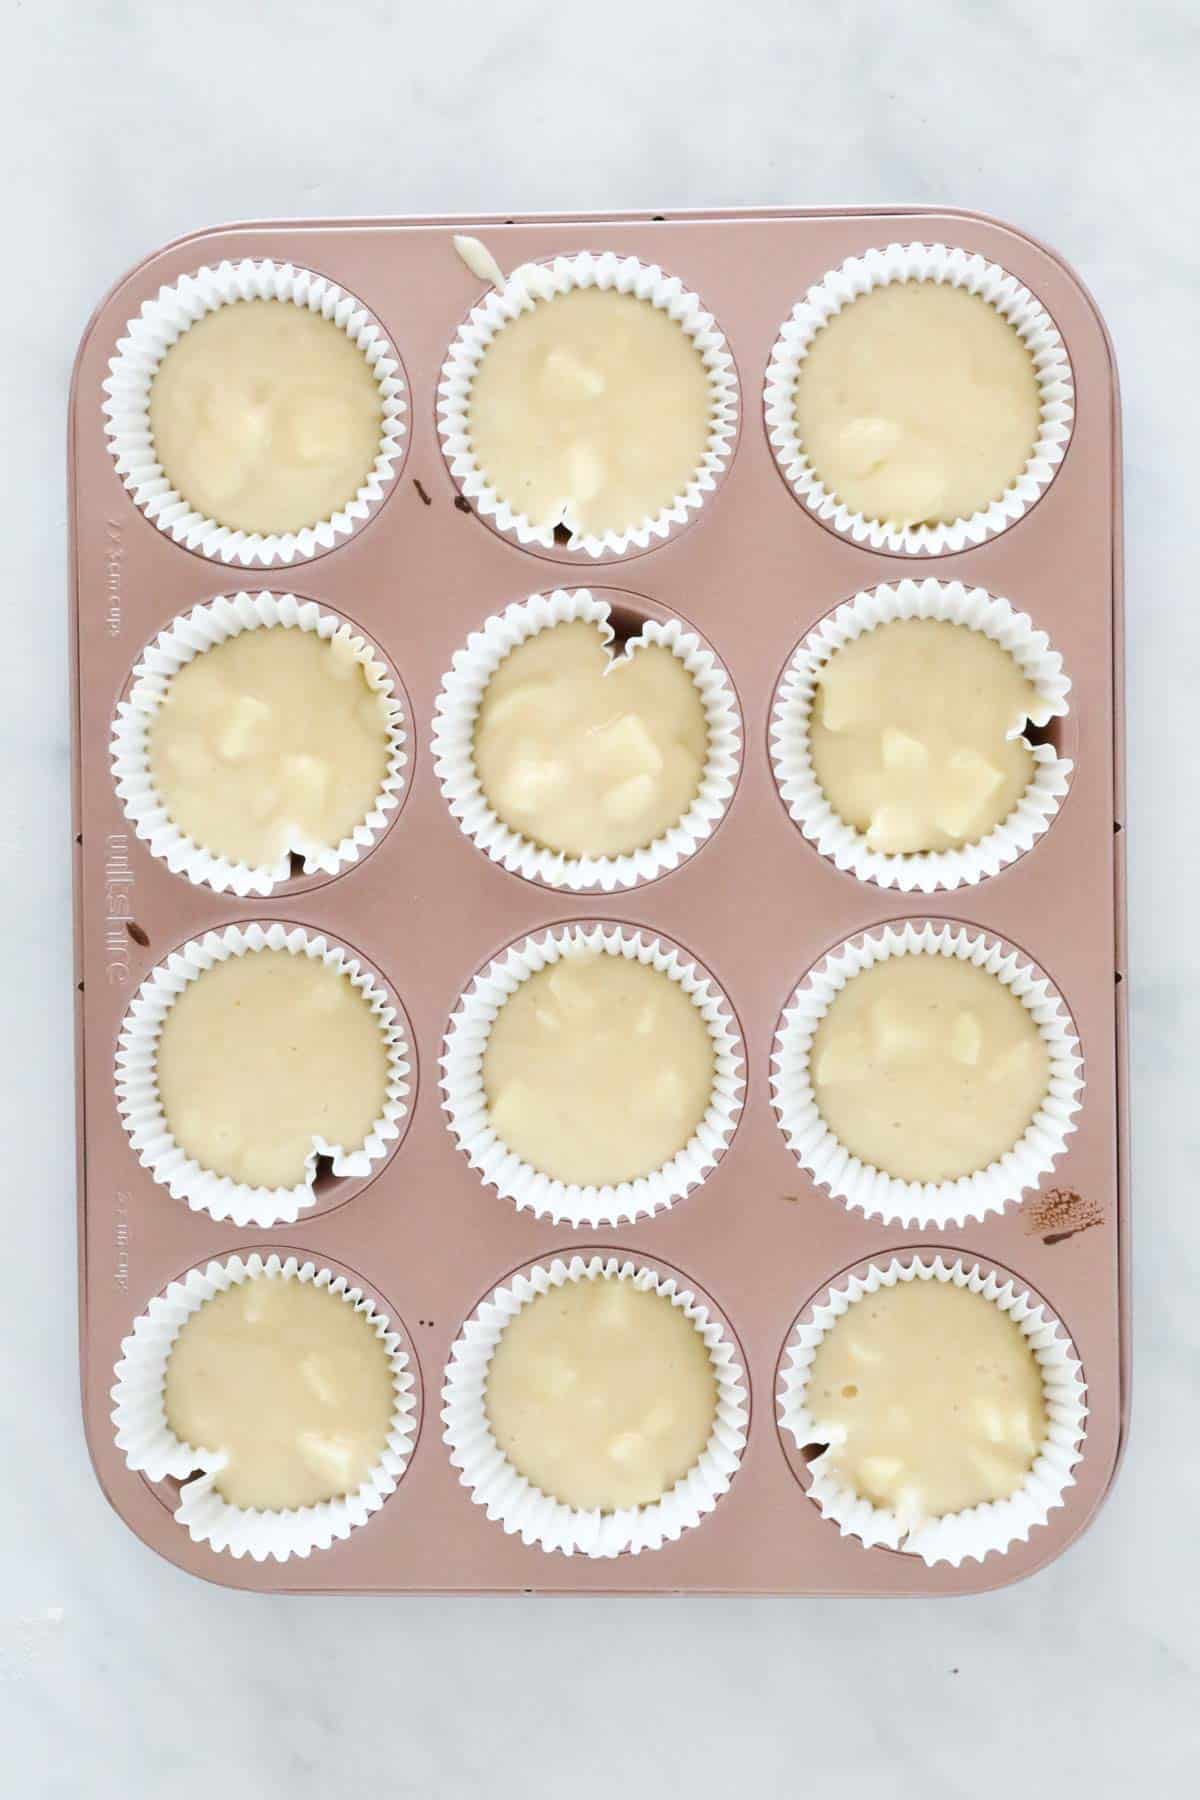 Muffin cases half filled with batter and chunks of white chocolate.